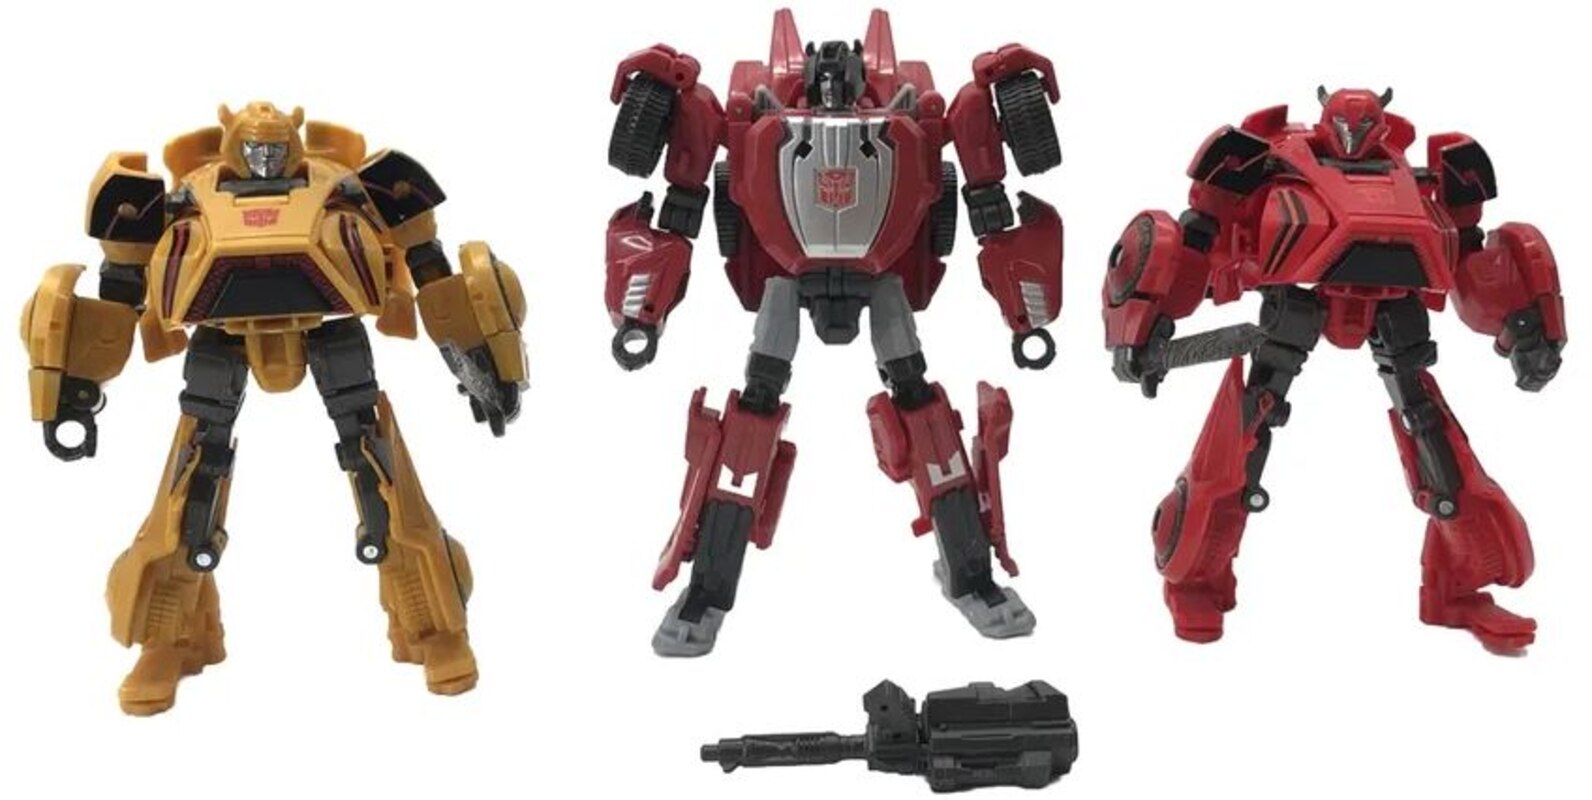 Sideswipe Gamer Edition New Images of Studio Series Deluxe Class Figure